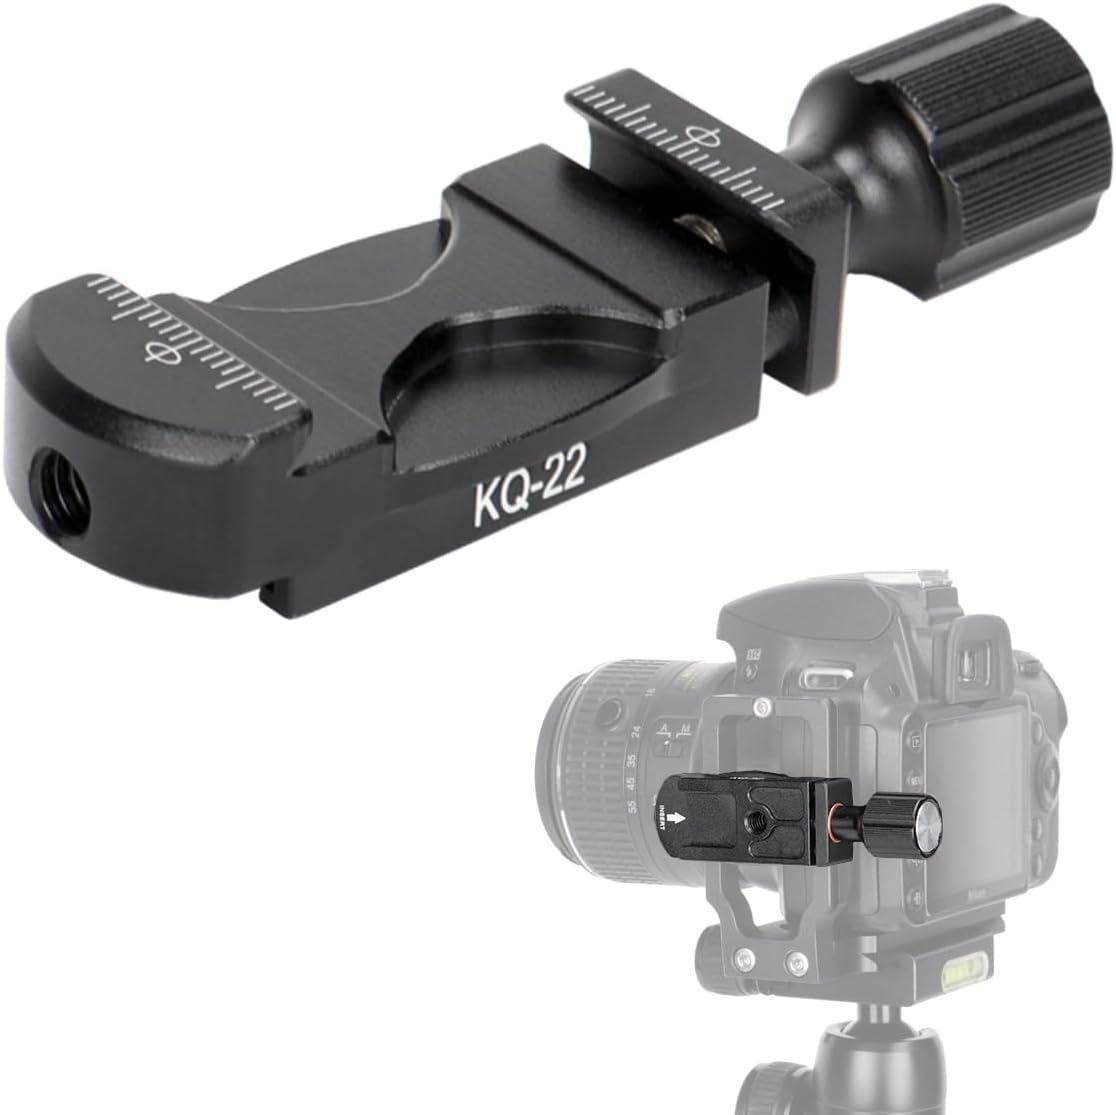 koolehaoda Universal Quick Release Clamp with Cold Shoe Mount Adapter and 1/4" Thread for Camera Tripod Head L Quick Release Plate L Bracket Compatible with Arca Style Plate